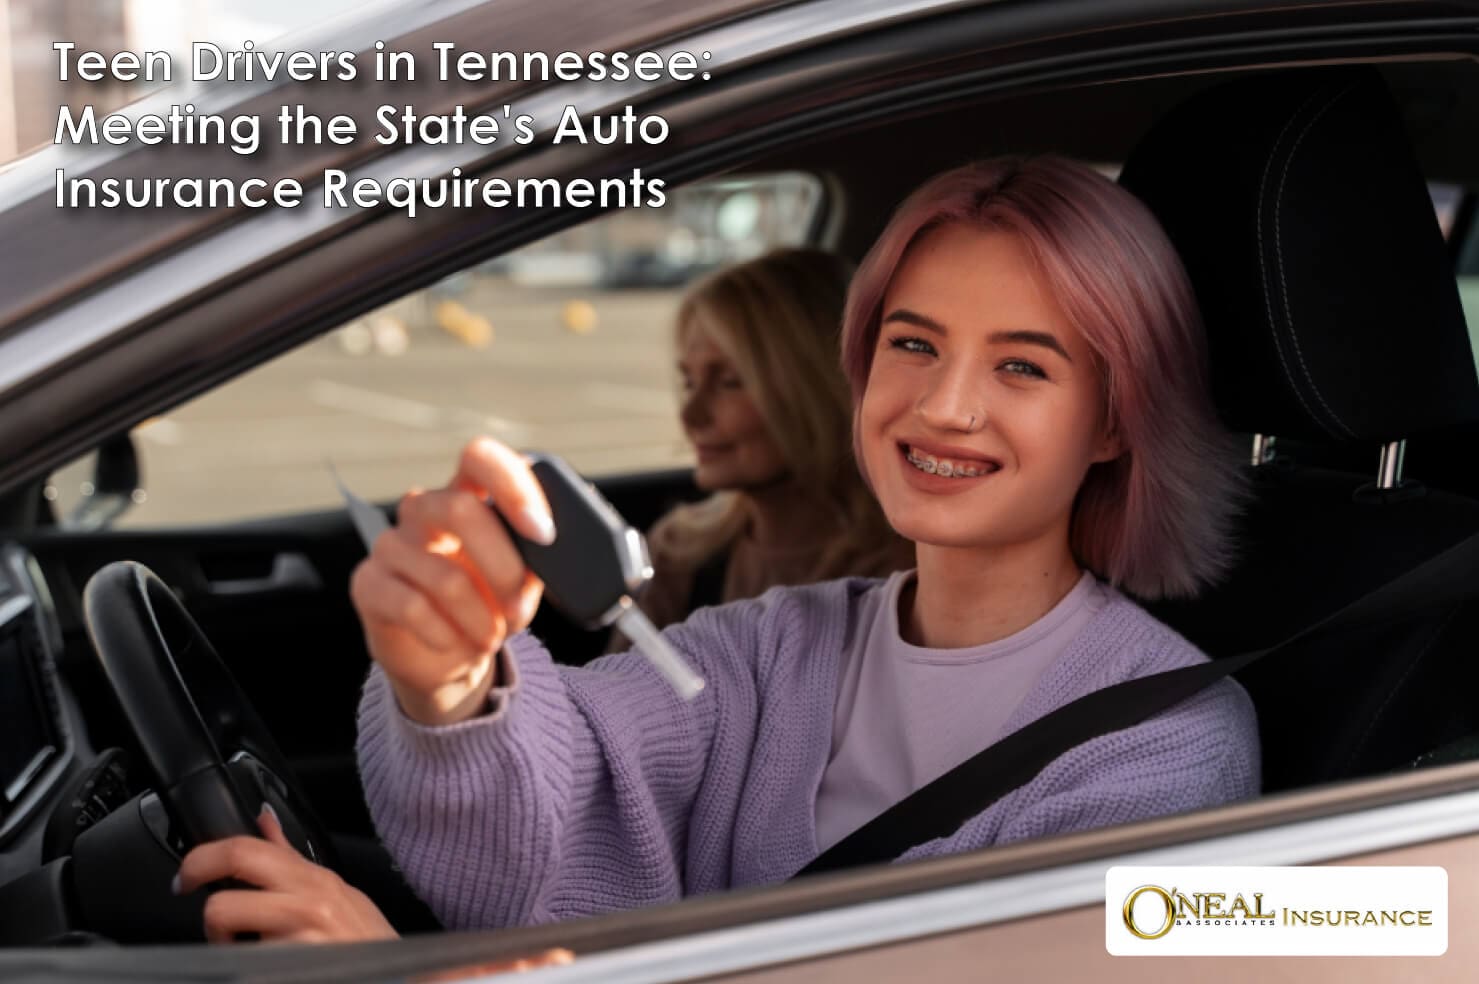 Teen Drivers in Tennessee Meeting the State's Auto Insurance Requirements